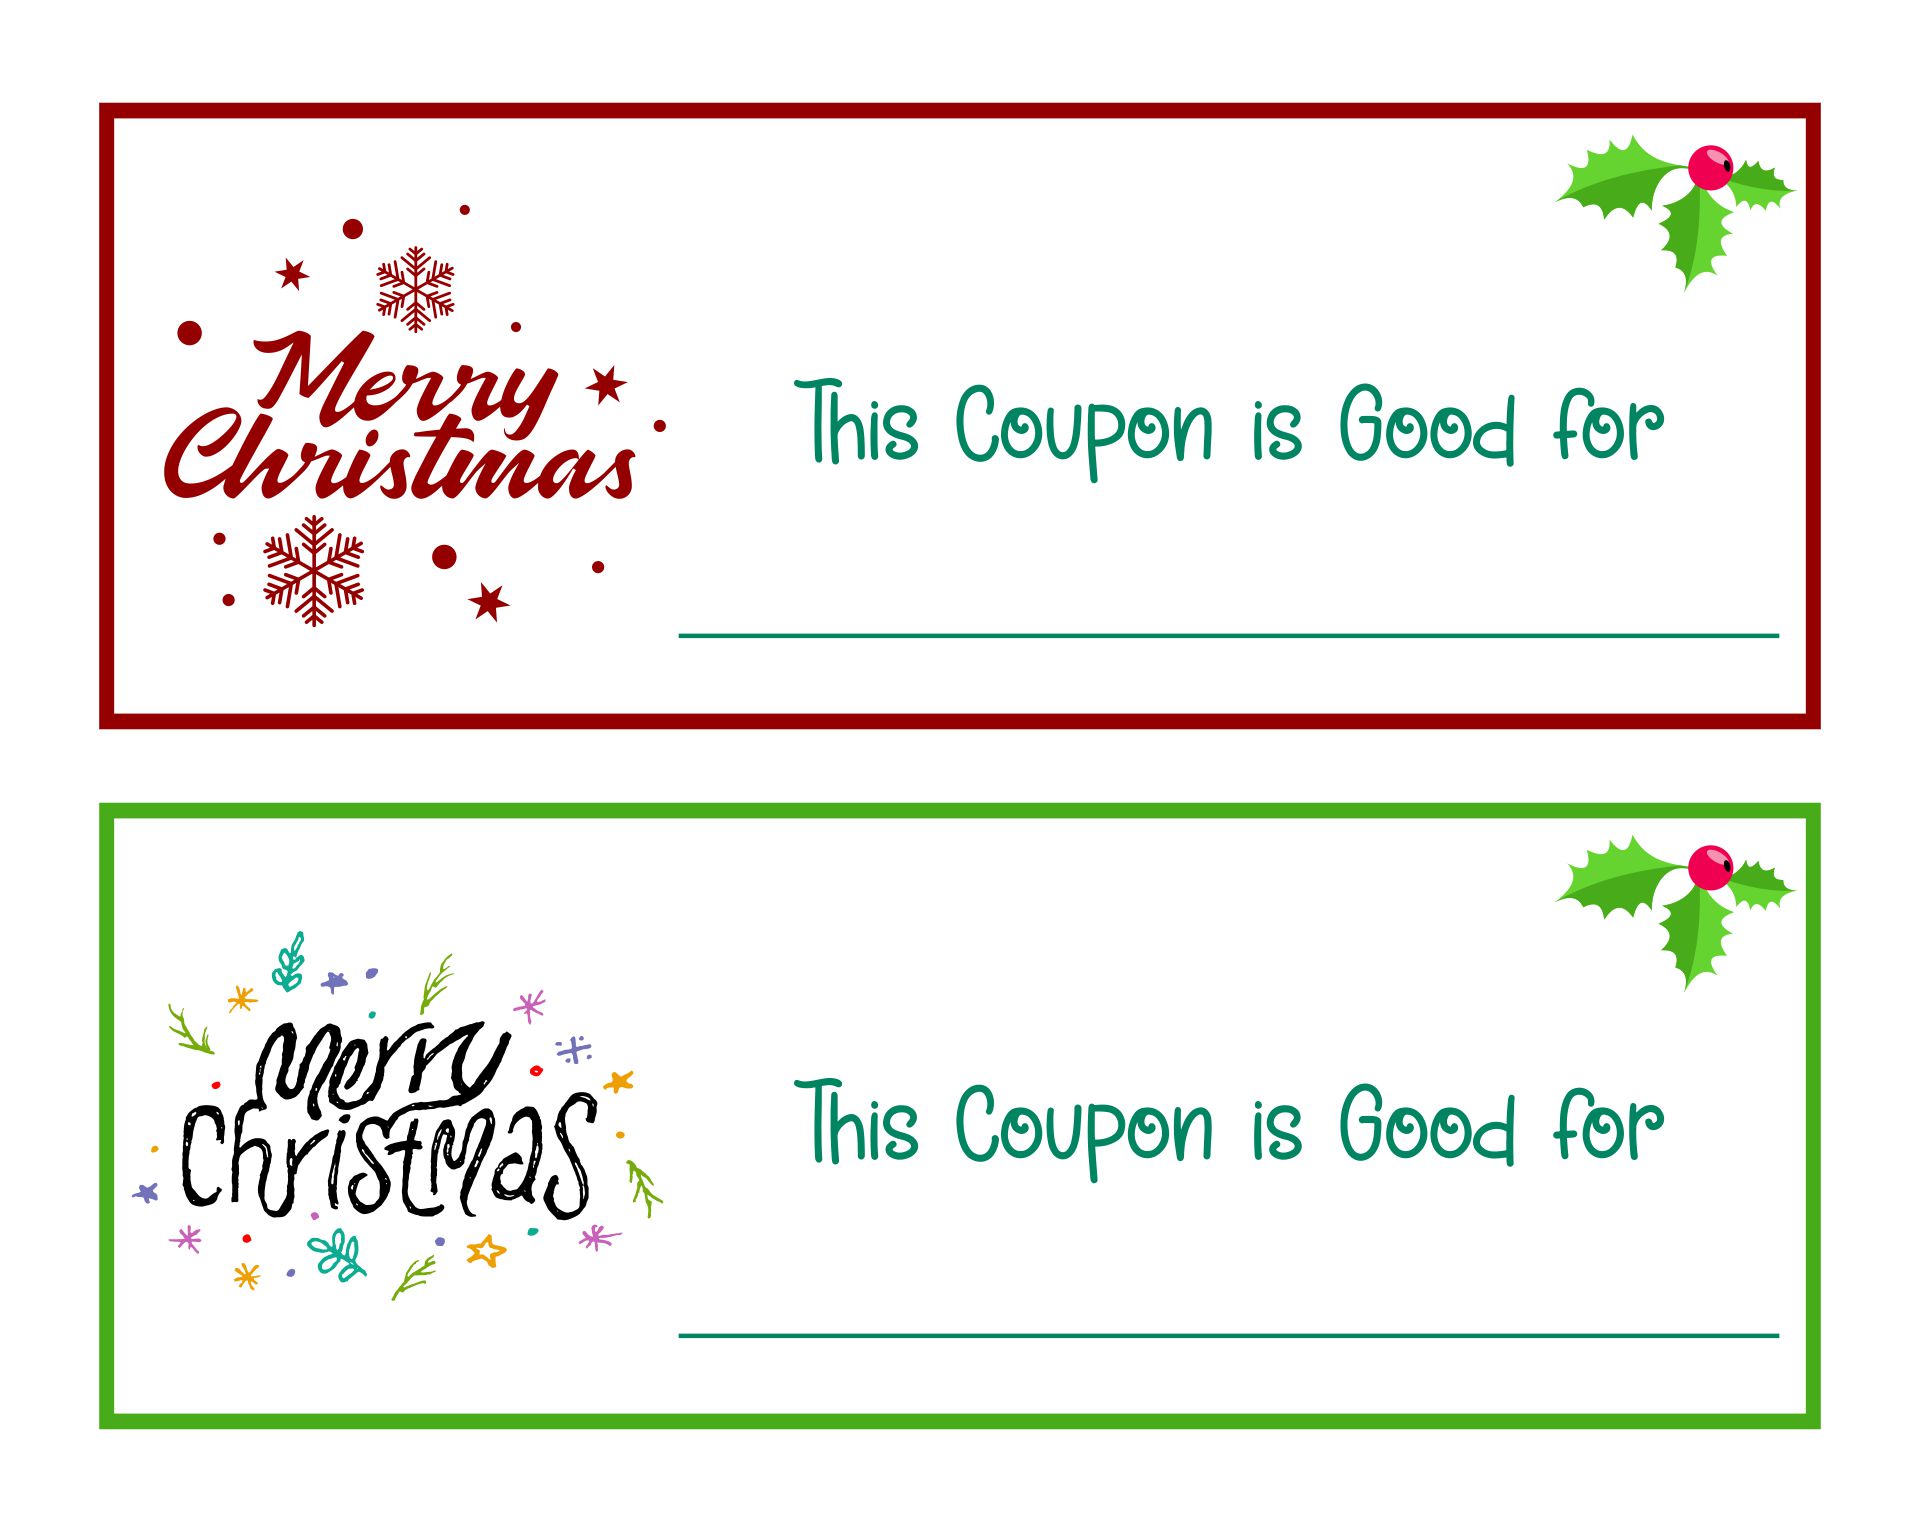 diy-love-coupons-free-printable-free-coupon-template-love-coupons